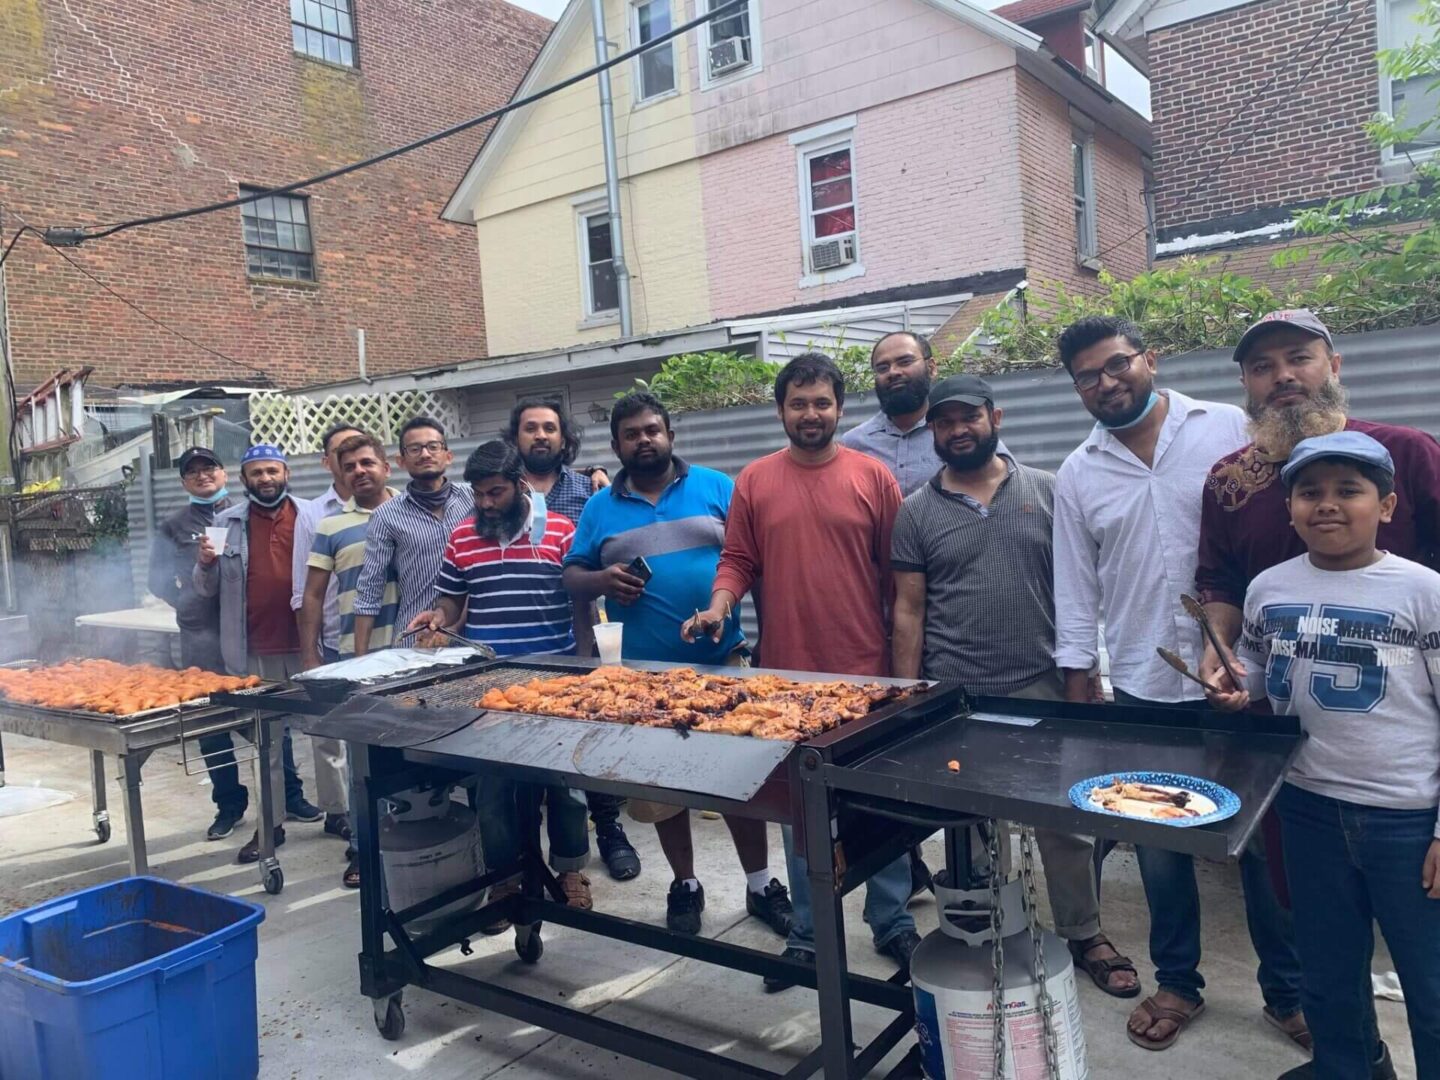 A community of Muslims having a cookout